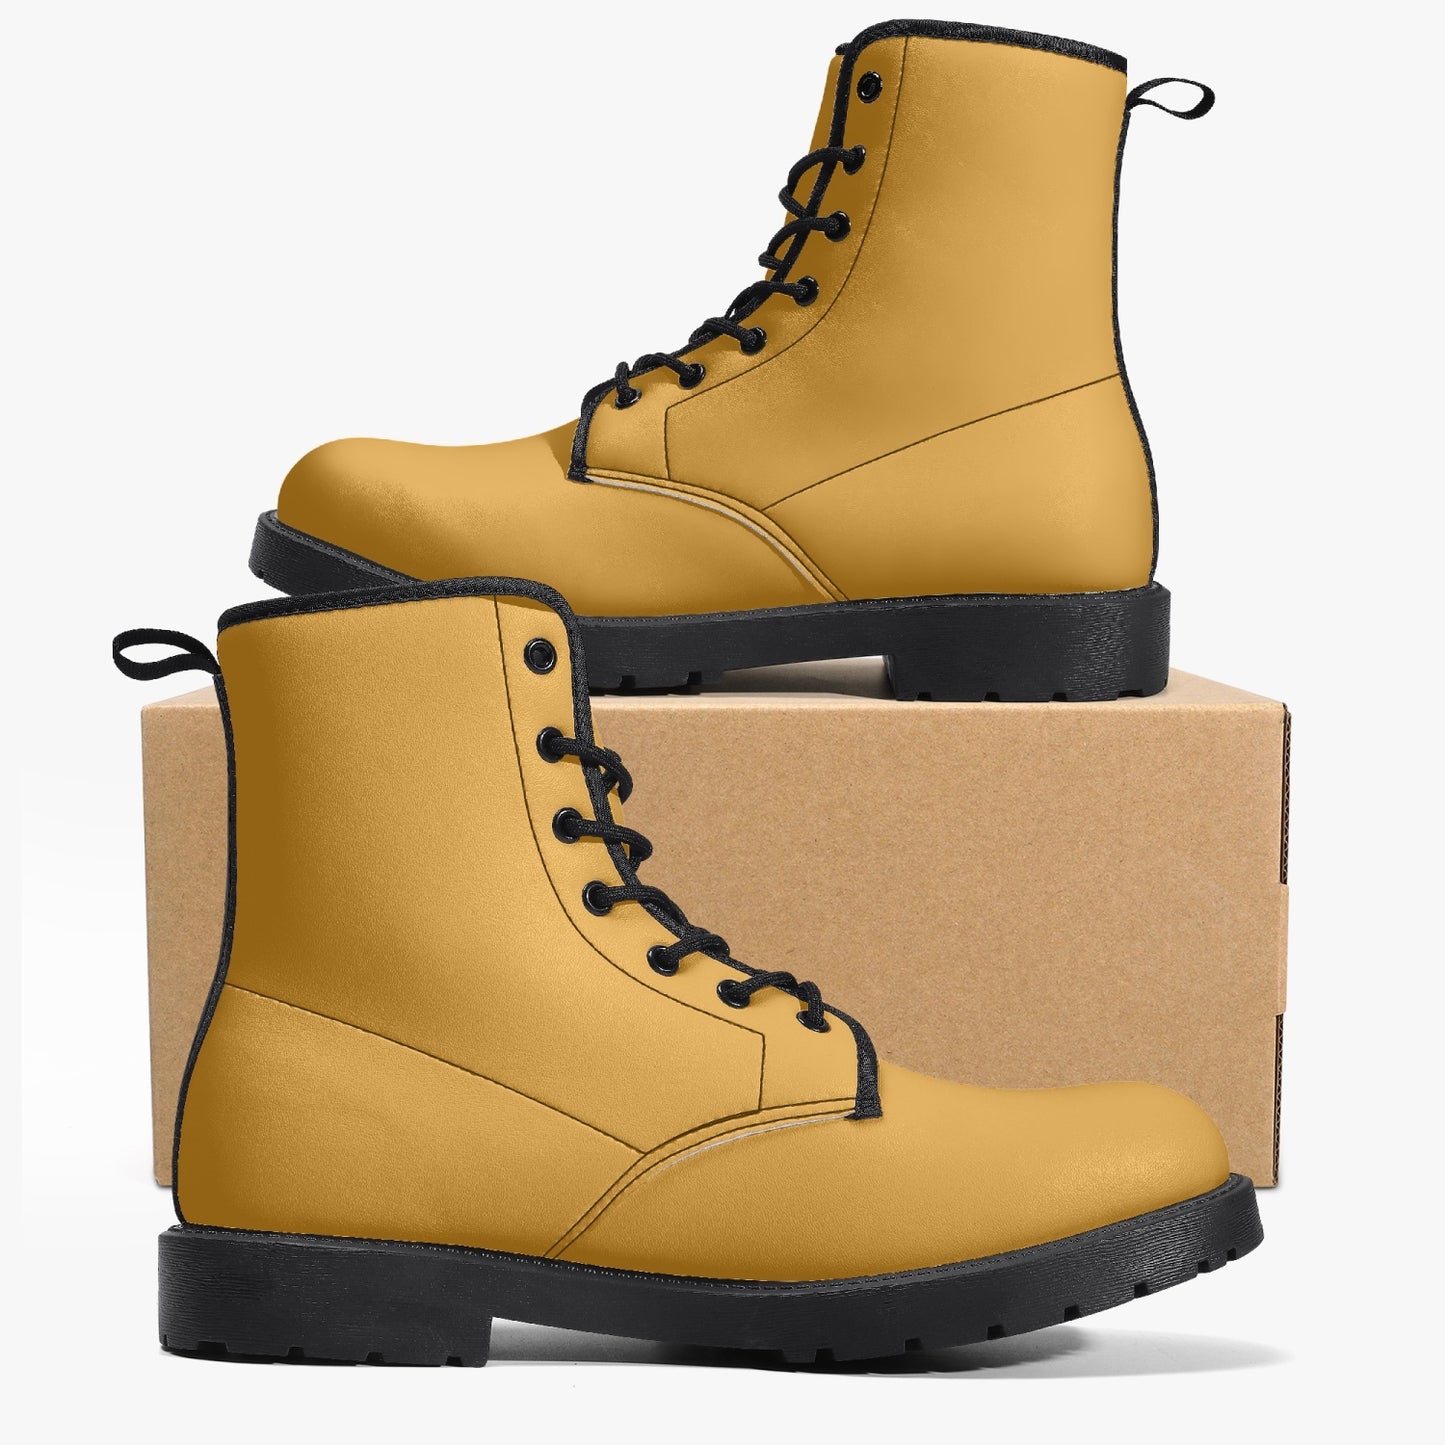 Gen "G" Trendy Leather Boots